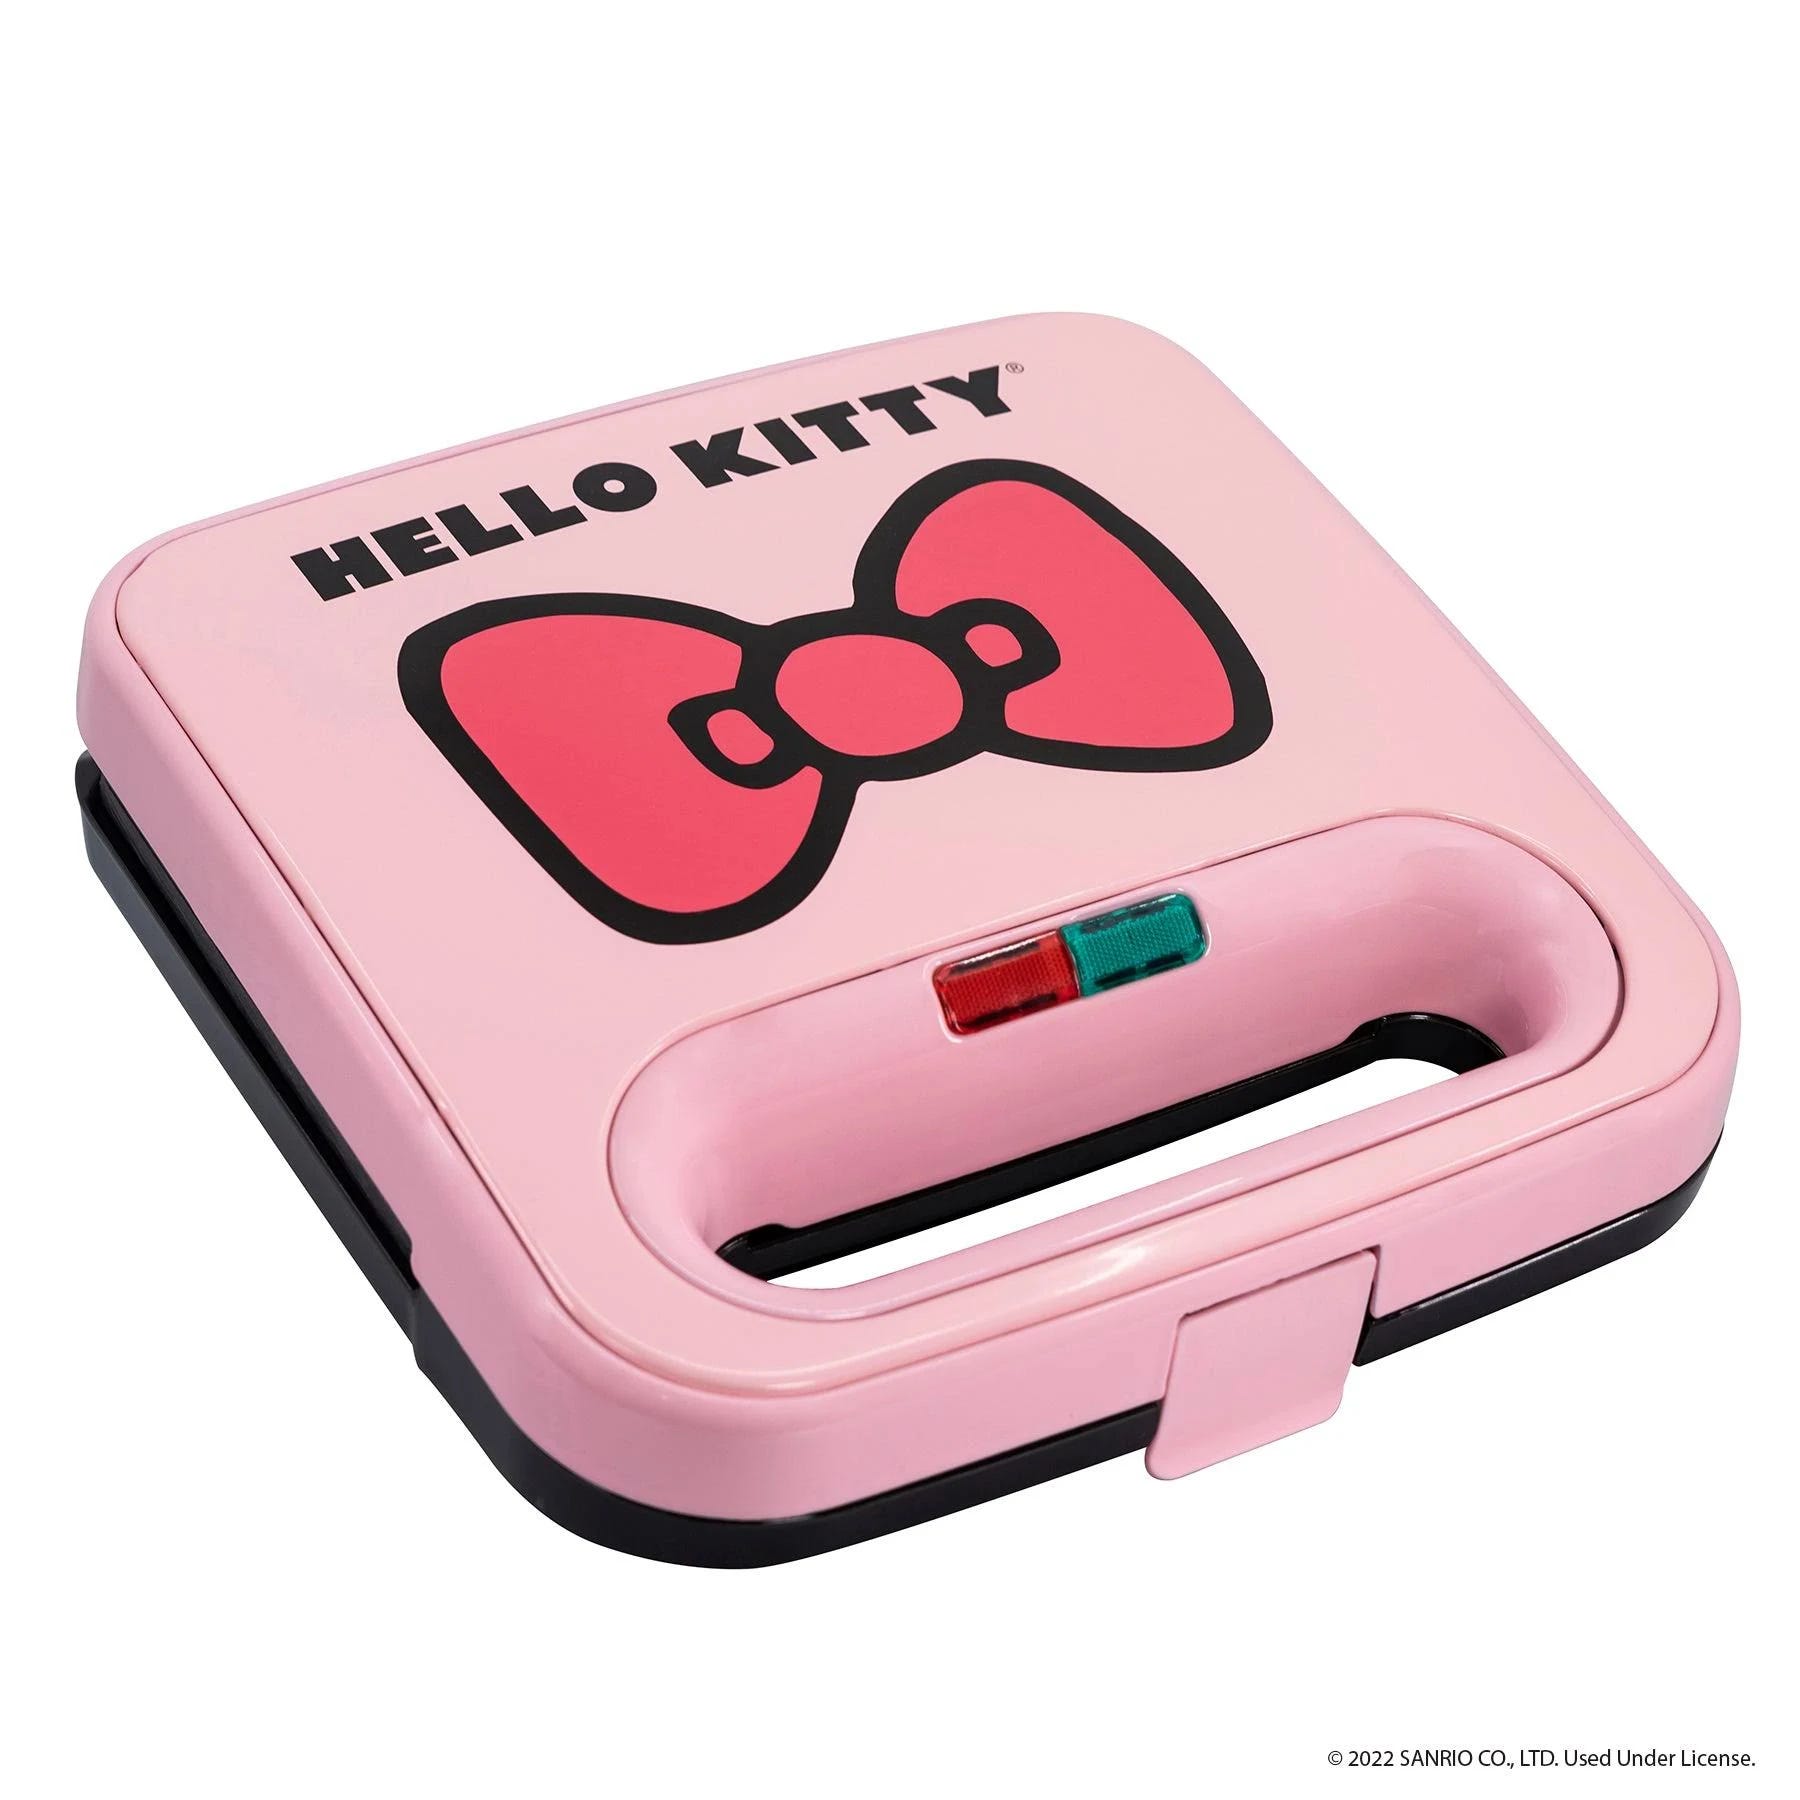 Hello Kitty Grilled Cheese Sandwich Maker - Unique Kitchen Gift | Image